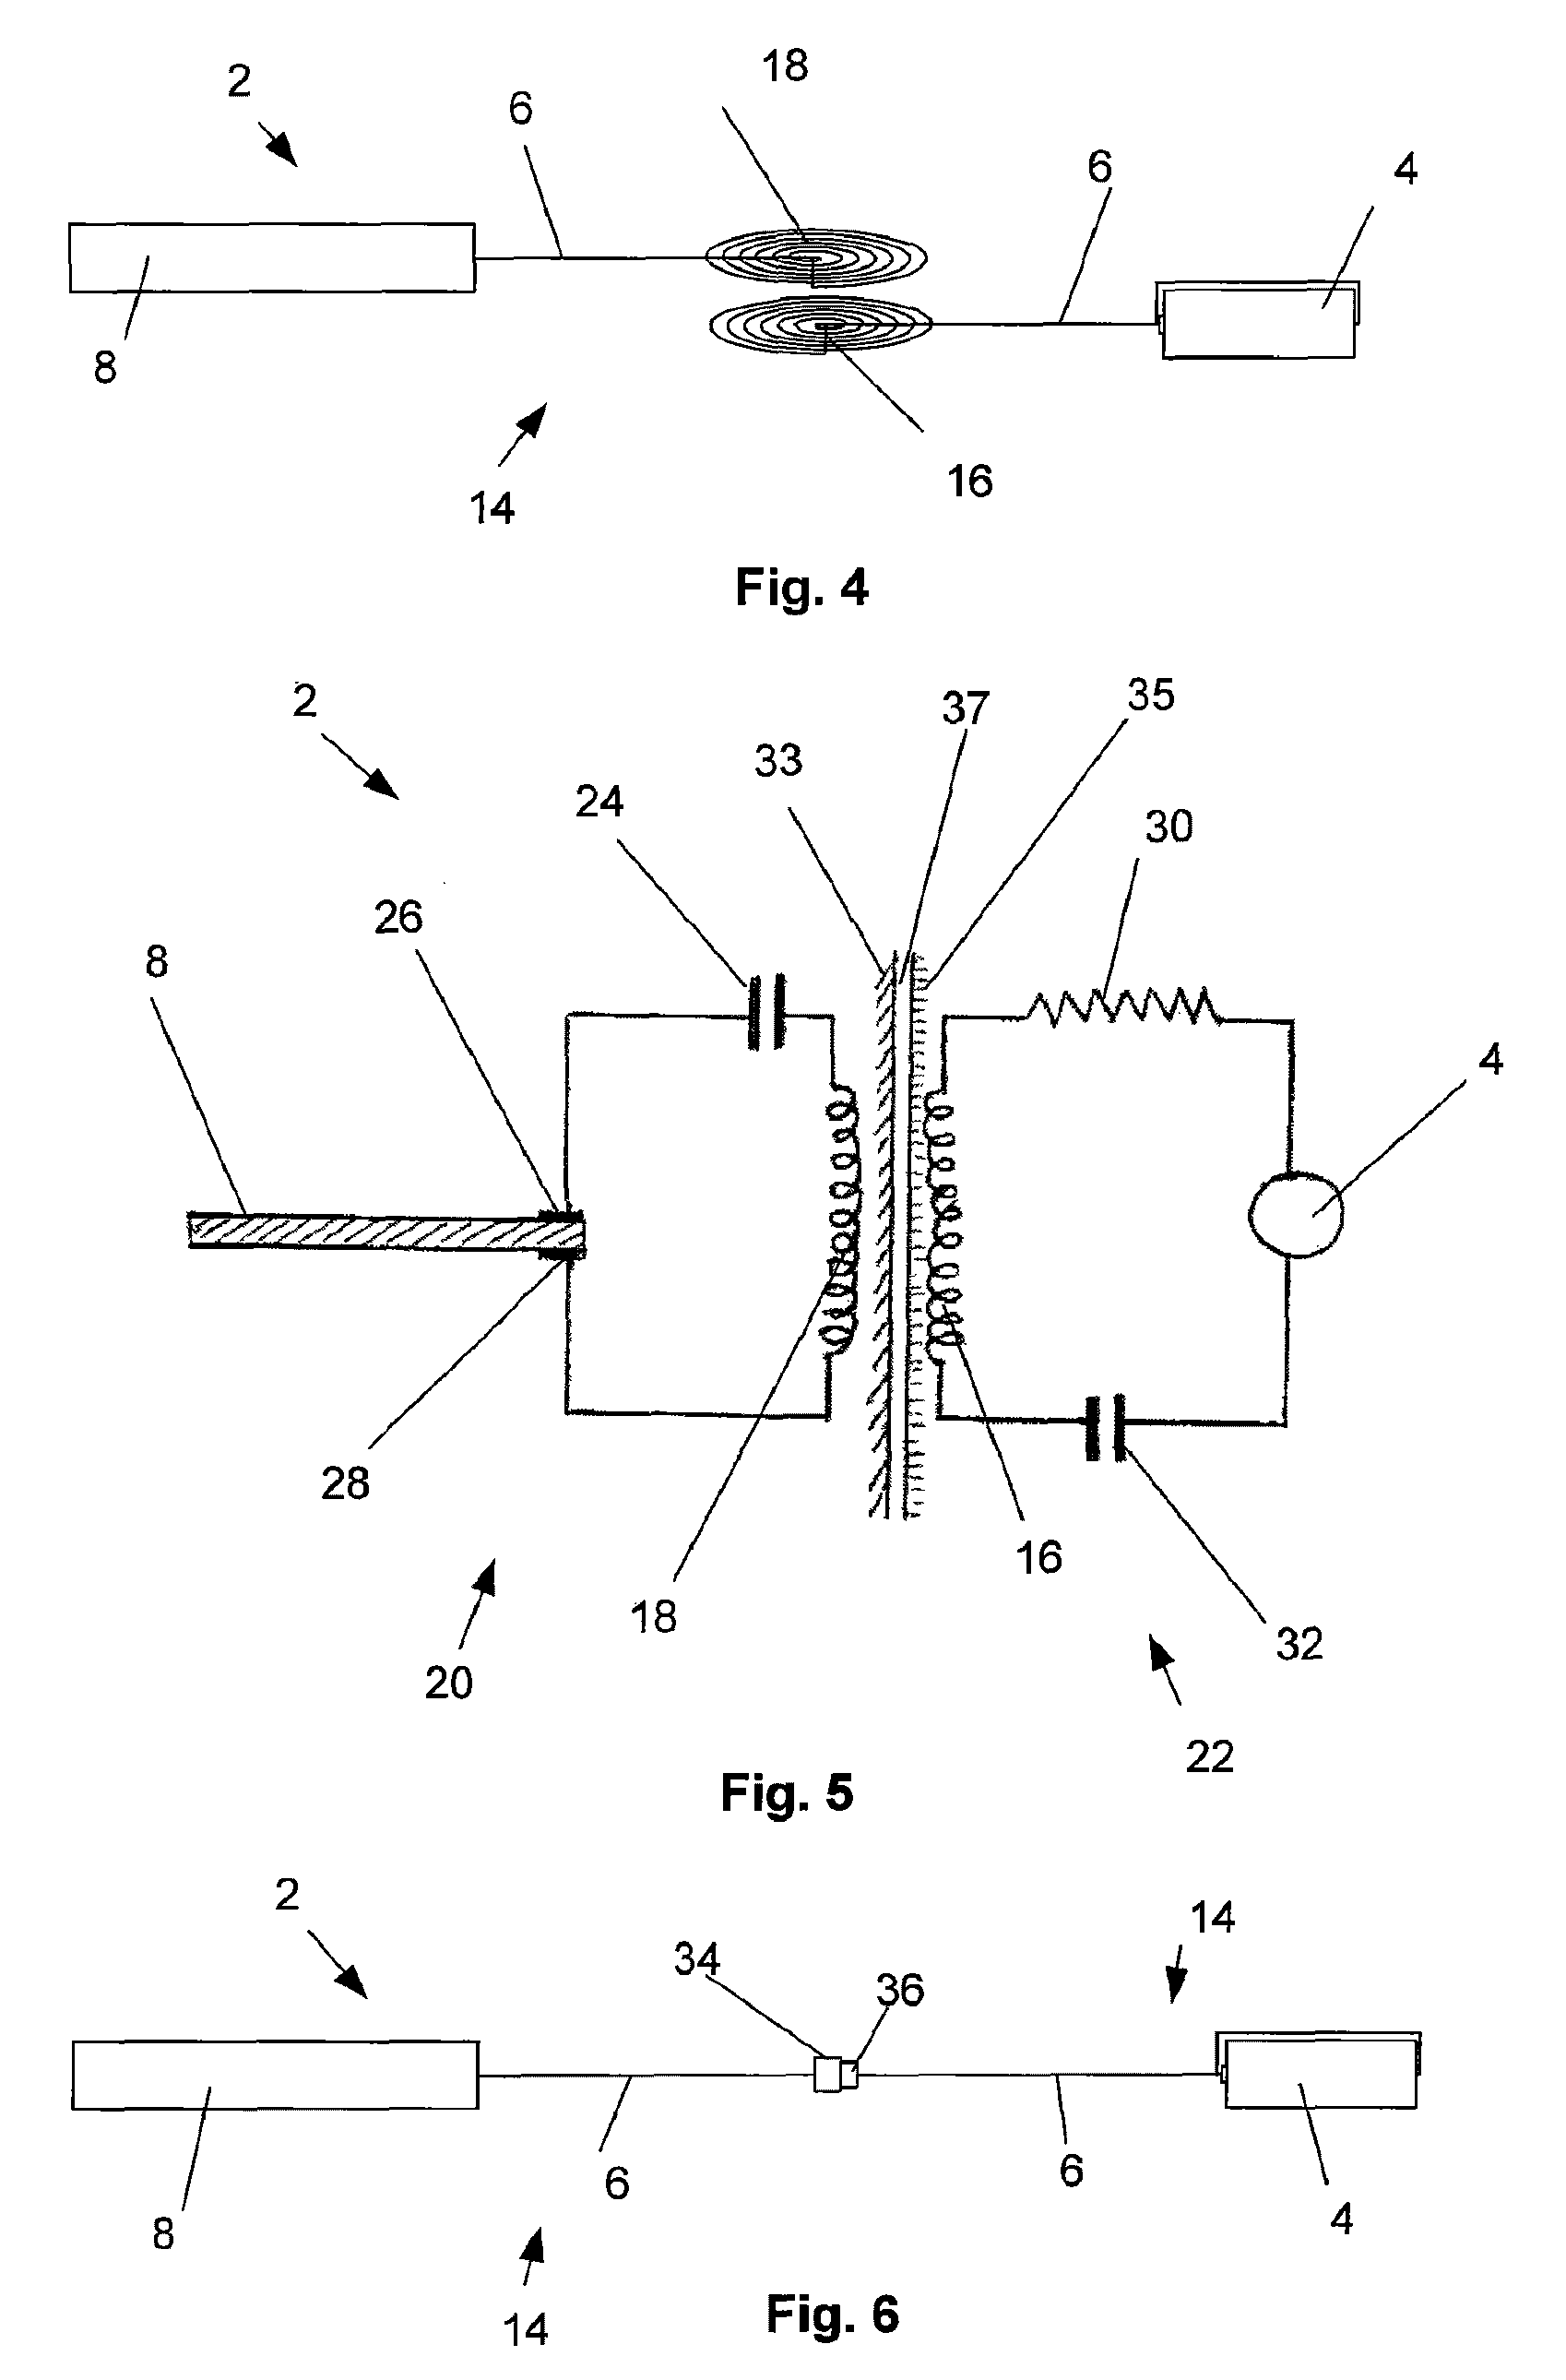 Tethered airway implants and methods of using the same